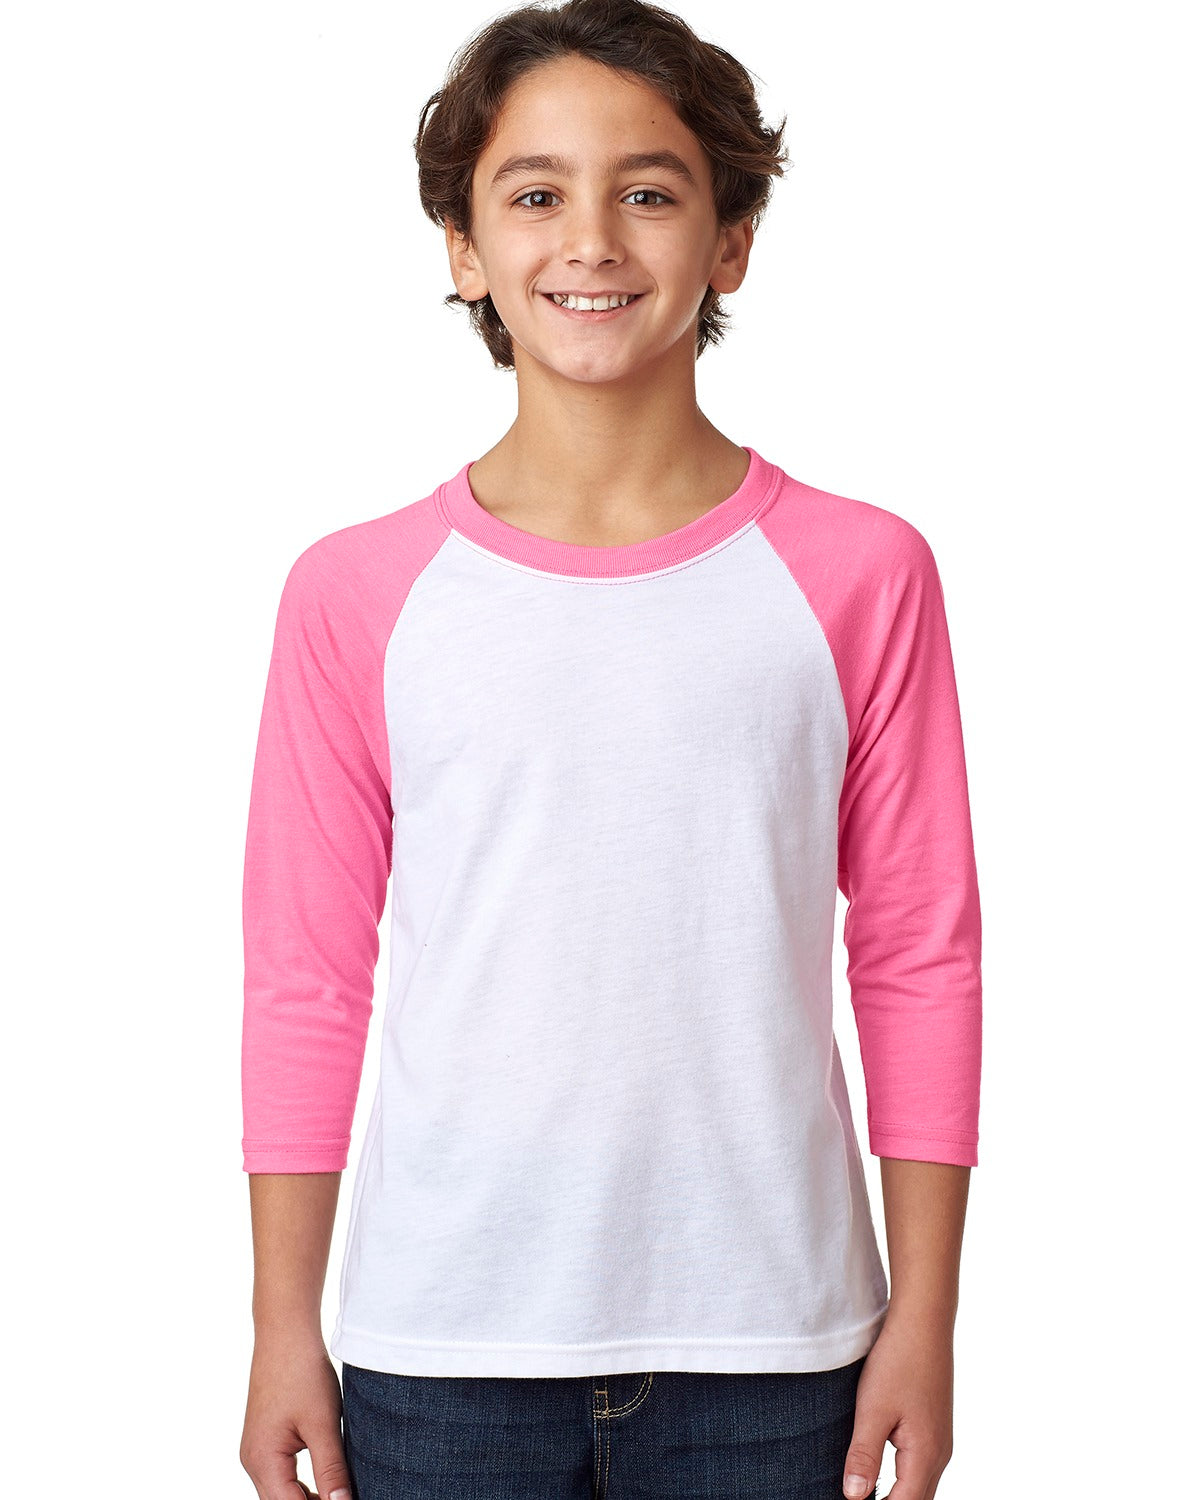 child model wearing next level youth 3/4 sleeve raglan tee in hot pink white